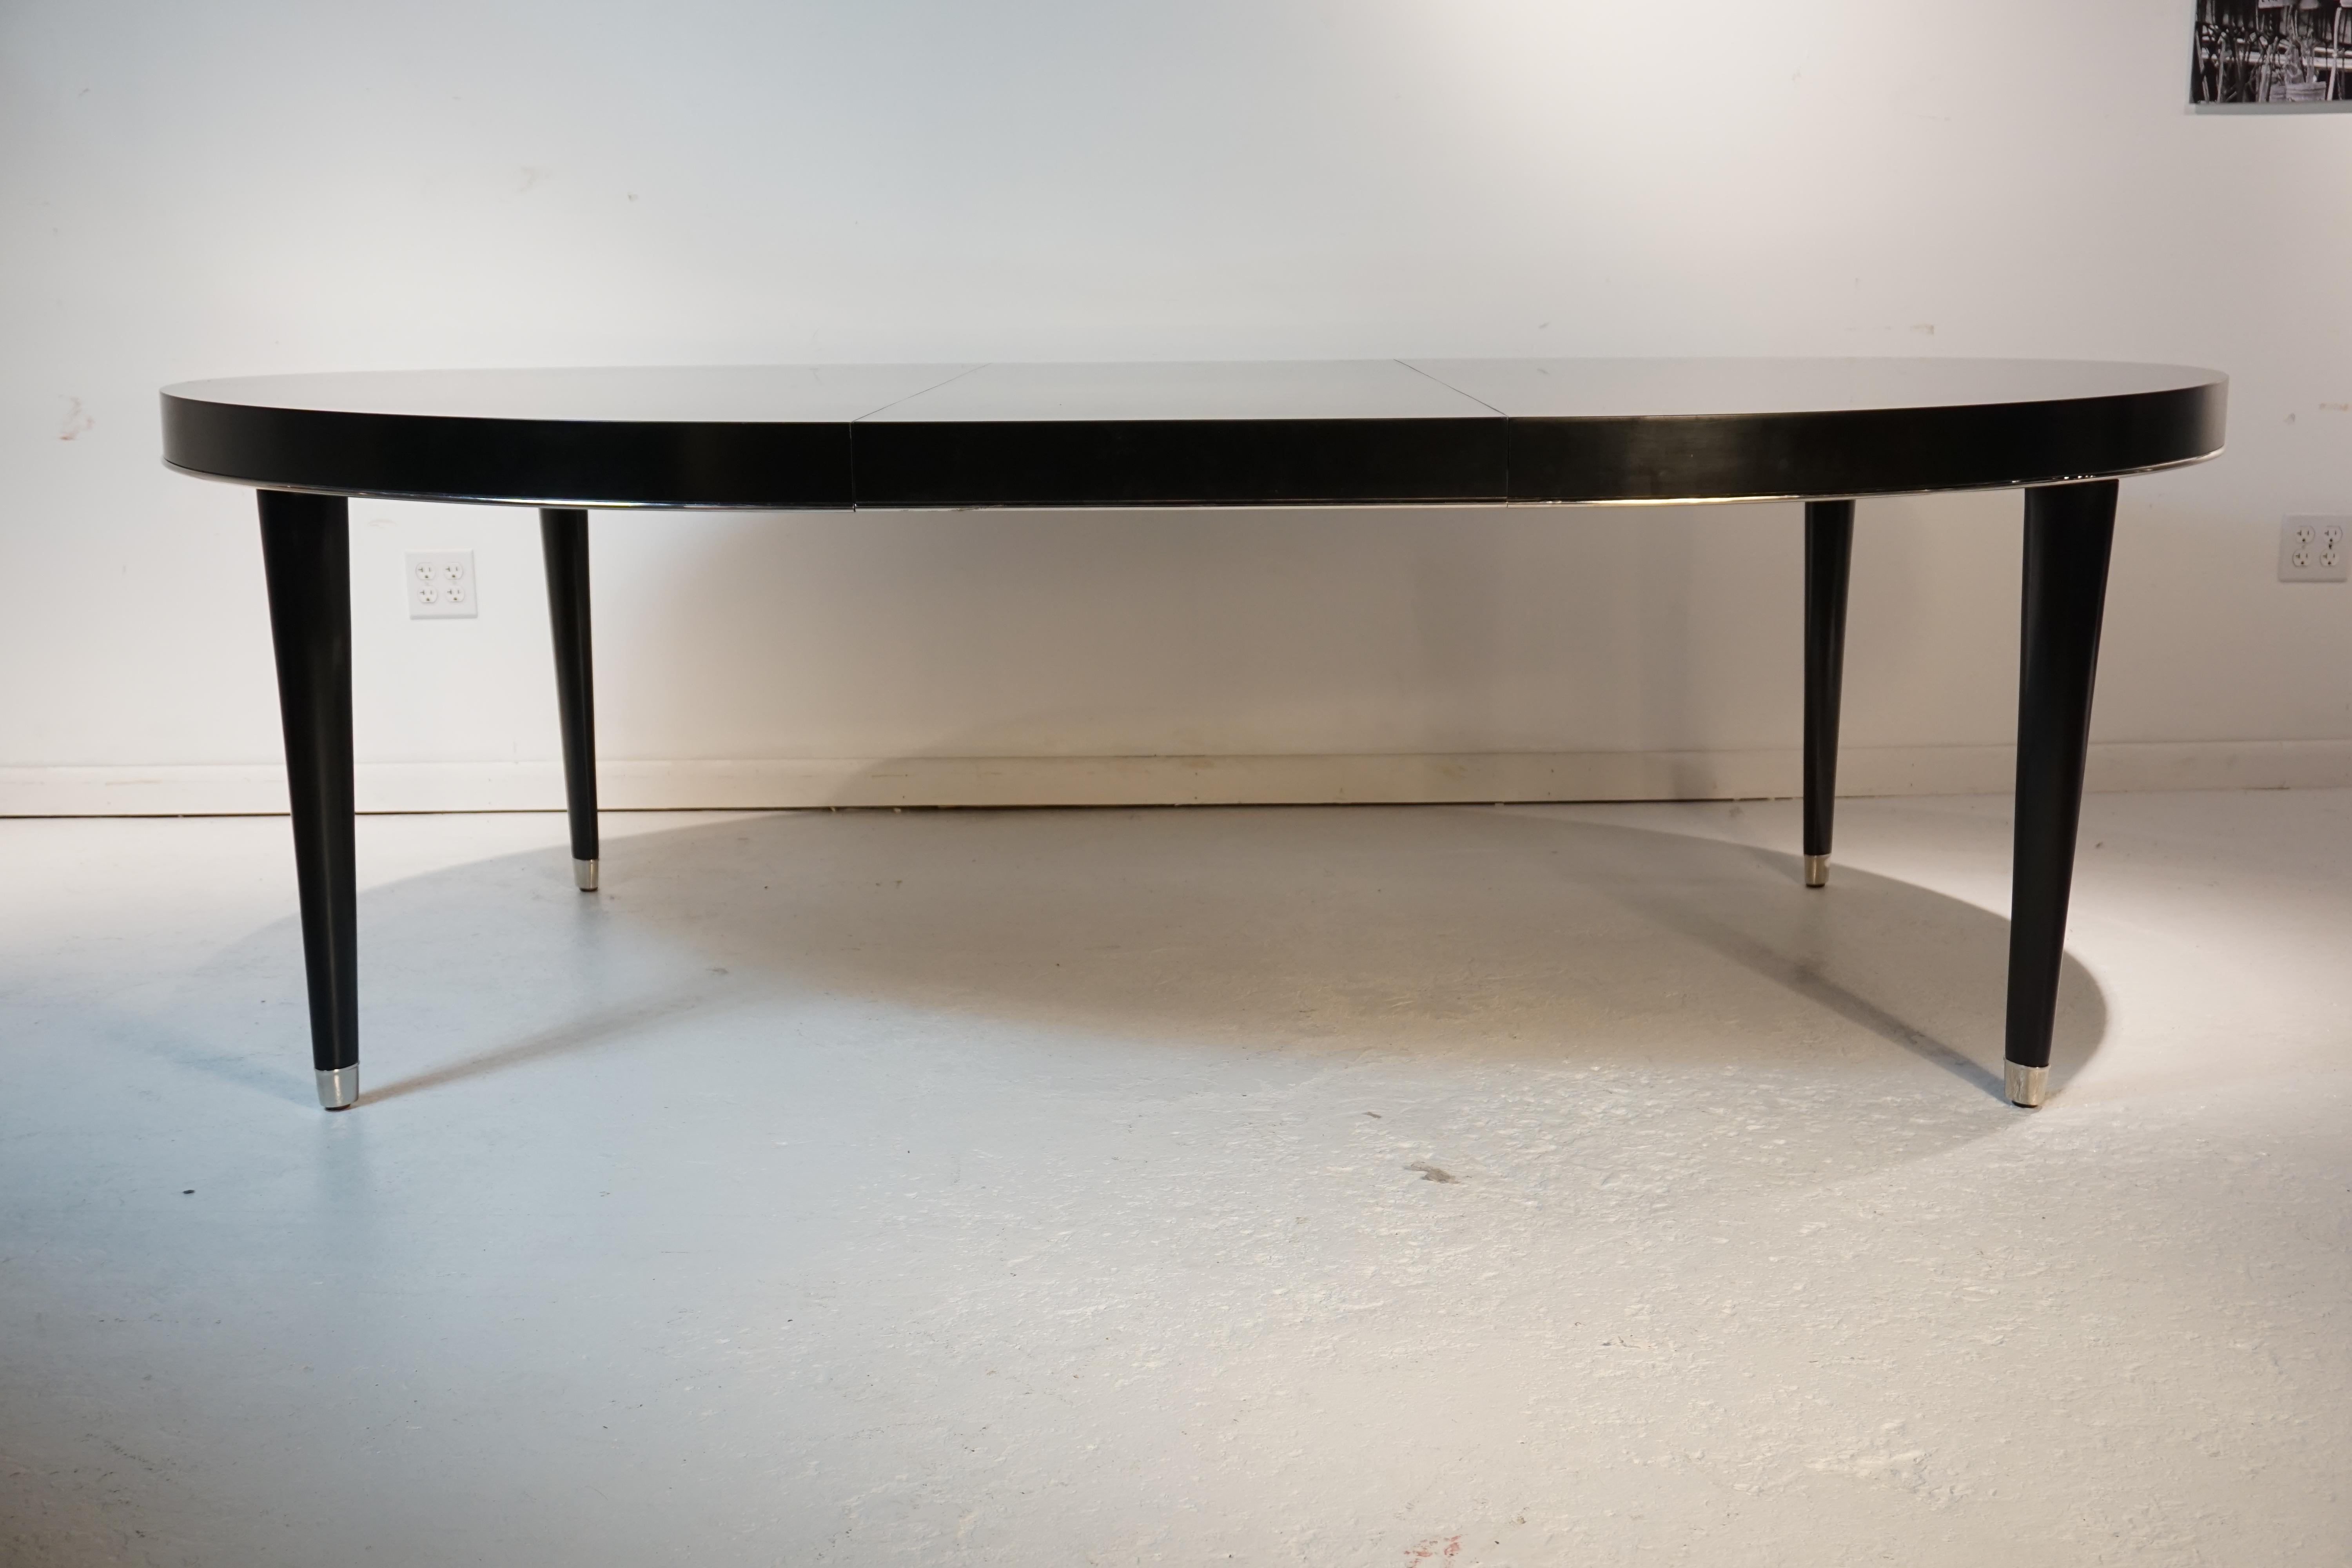 Incredible iconic ralph Lauren dining table. Beautiful black lacquer with silver trim and feet. Extension to 96 inches. Statement piece for any dining space.